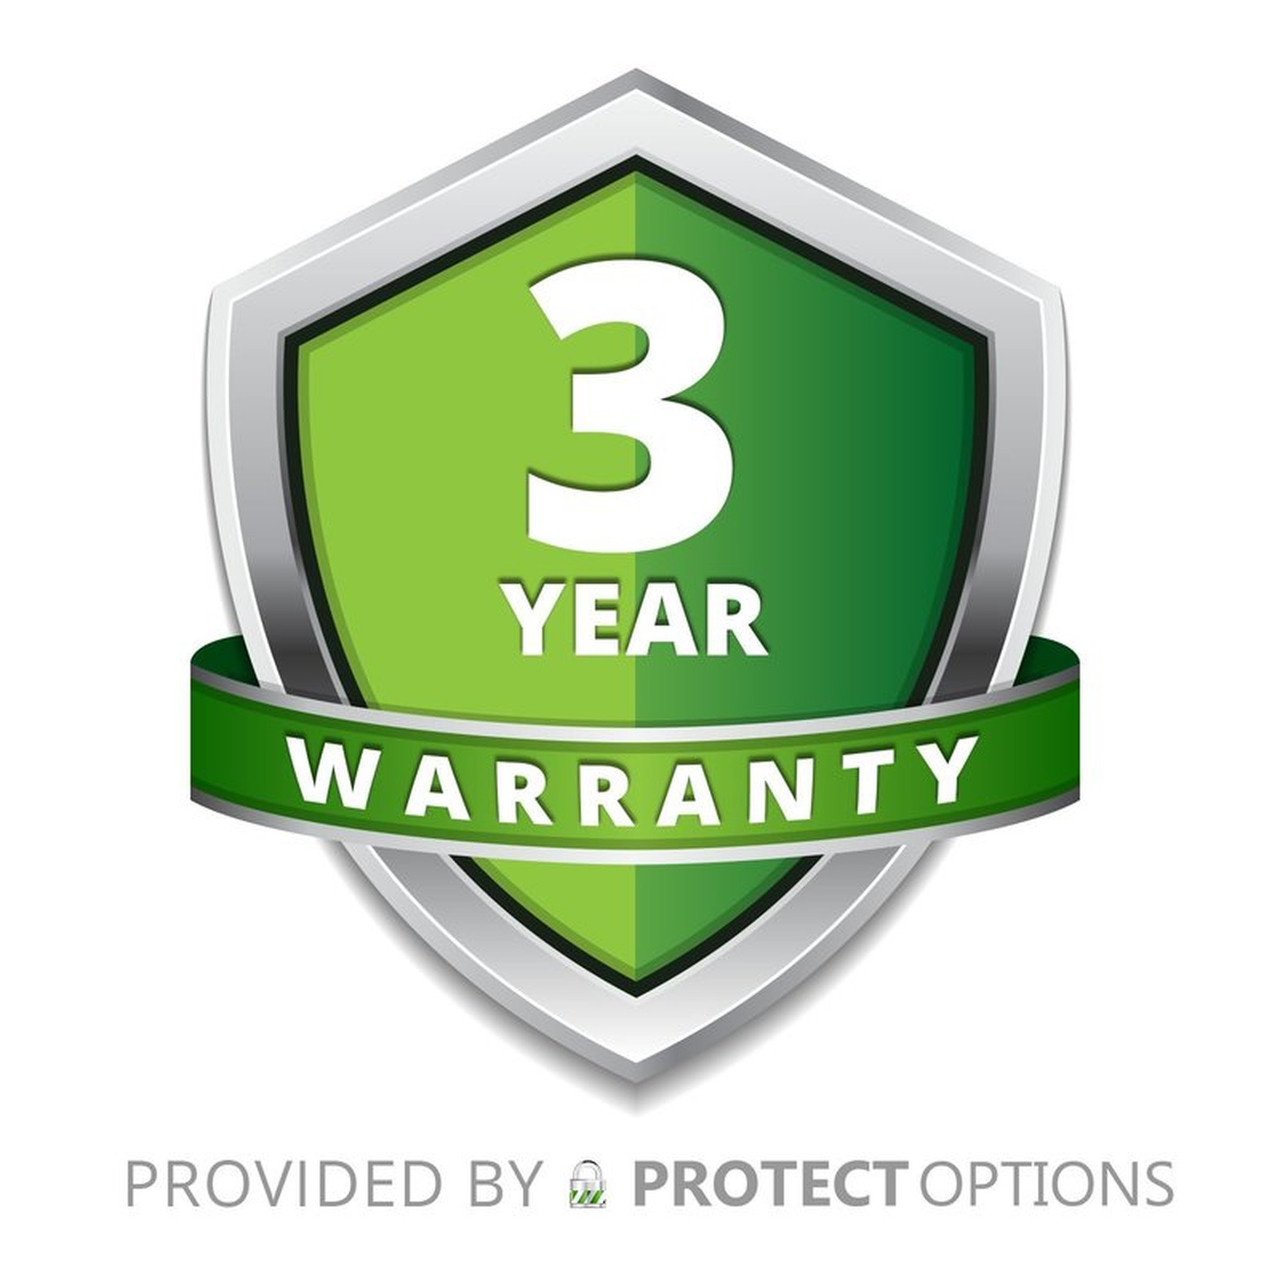 3 Year Warranty With Deductible - Laptops sale price of $300-$399.99